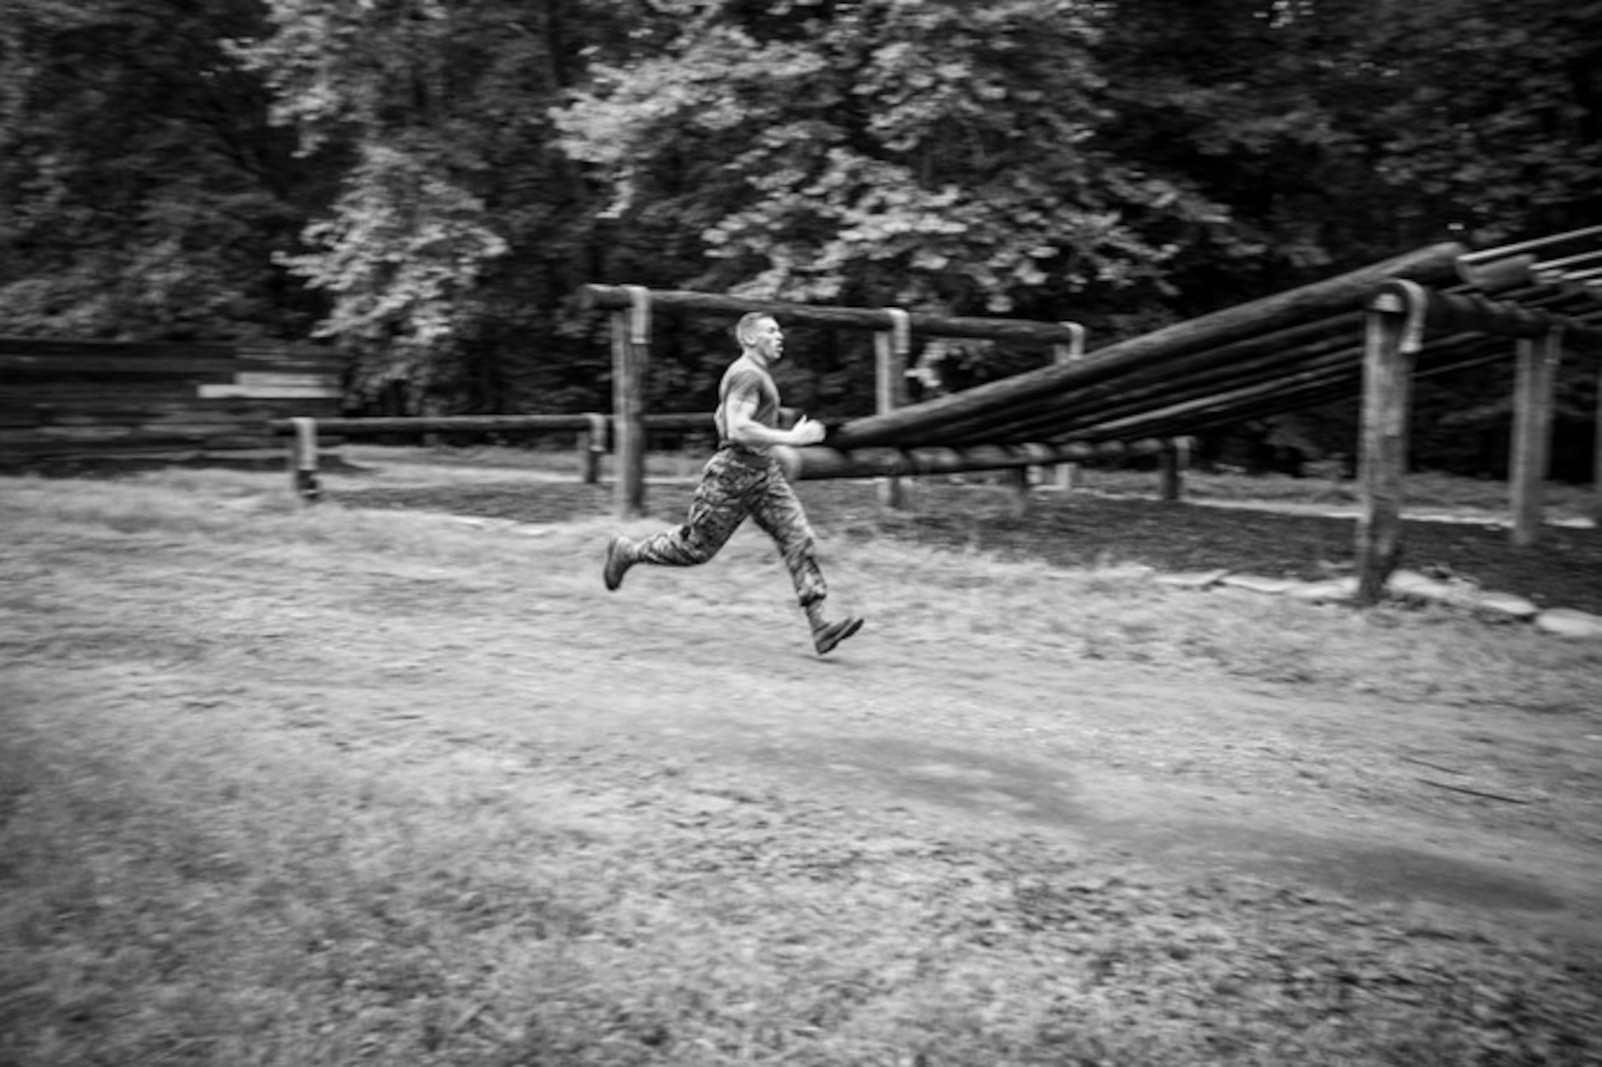 A Marine sprints as part of a Endurance Course / Obstacle Course Physical Training Session during Force Fitness Instructor Course 4-17.